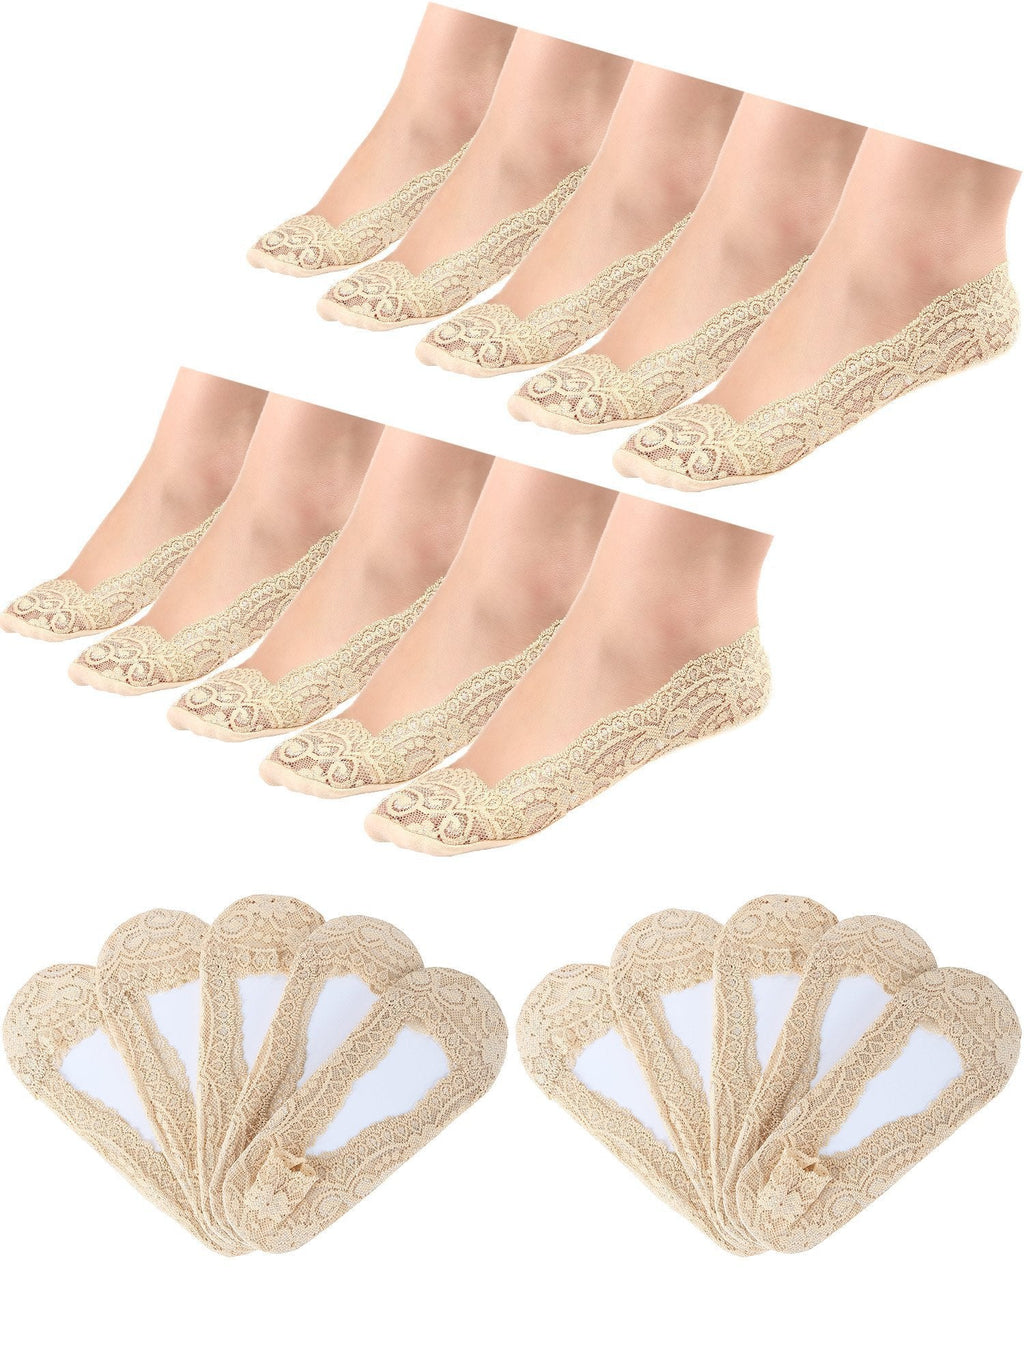 Hestya 10 Pairs No Show Lace Boat Socks Non-slip Ankle Socks Invisible Socks for Women Favors 4 different color set - BeesActive Australia